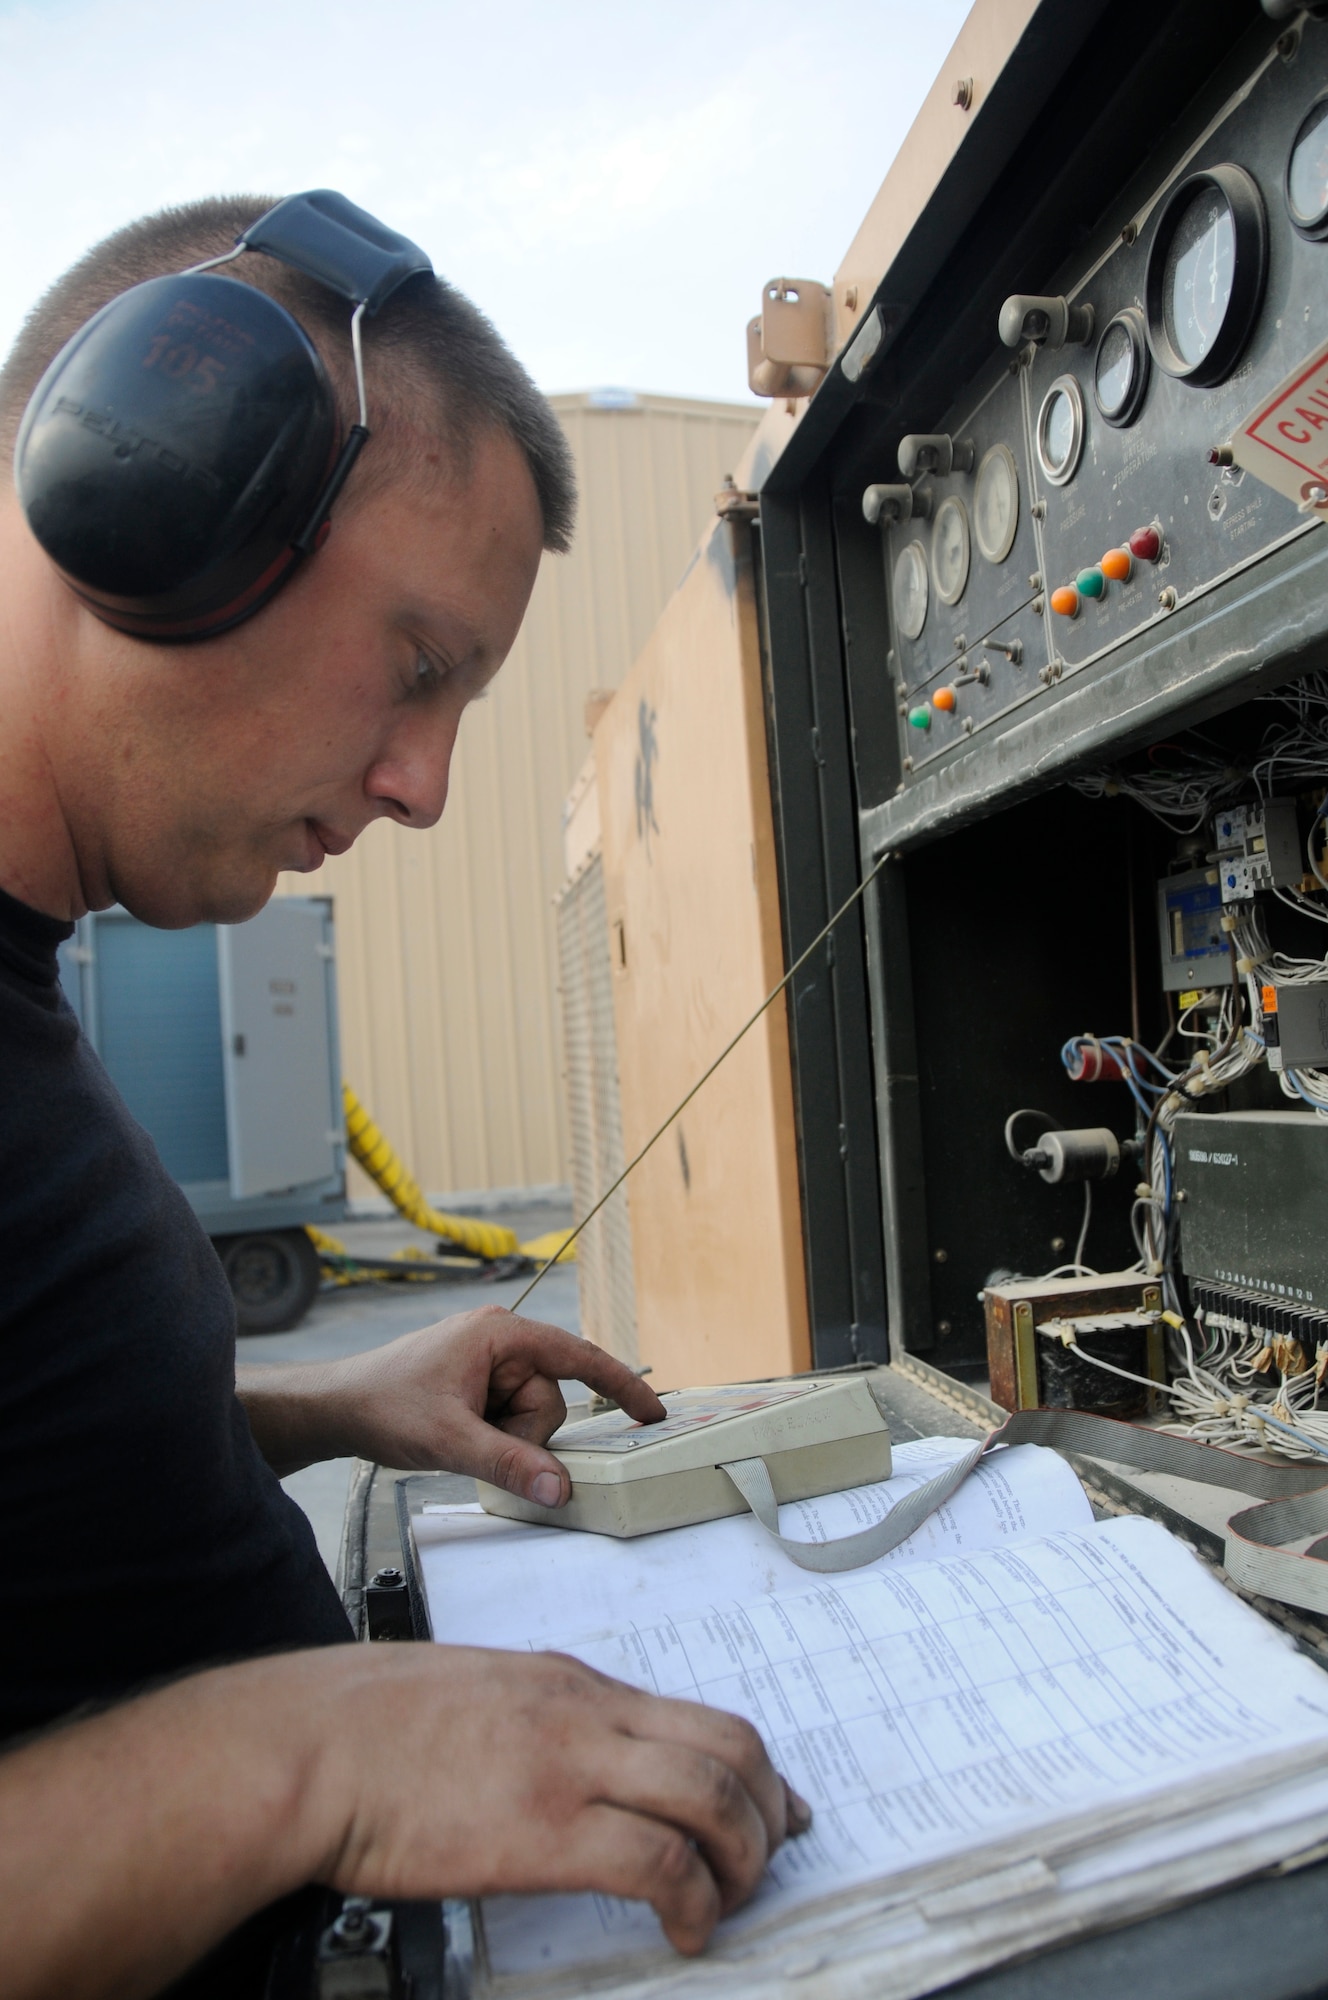 Staff Sgt. Justin Manning, aerospace ground equipment (AGE) maintainer assigned to the 379th Expeditionary Maintenance Squadron, uses a Sporlan tester and operating instructions to perform an operations check of a MA3D air conditioner Aug. 23, 2008, at an undisclosed air base in Southwest Asia. Sergeant Manning is responsible for maintaining equipment required to support Air Force aircraft while on the tarmac. Sergeant Manning, a native of New Haven, Vt., is deployed from McConnell Air Force Base, Kan., in support of Operations Iraqi Freedom, Enduring Freedom and Joint Task Force-Horn of Africa. (U.S. Air Force photo by Staff Sgt. Darnell T. Cannady/Released)